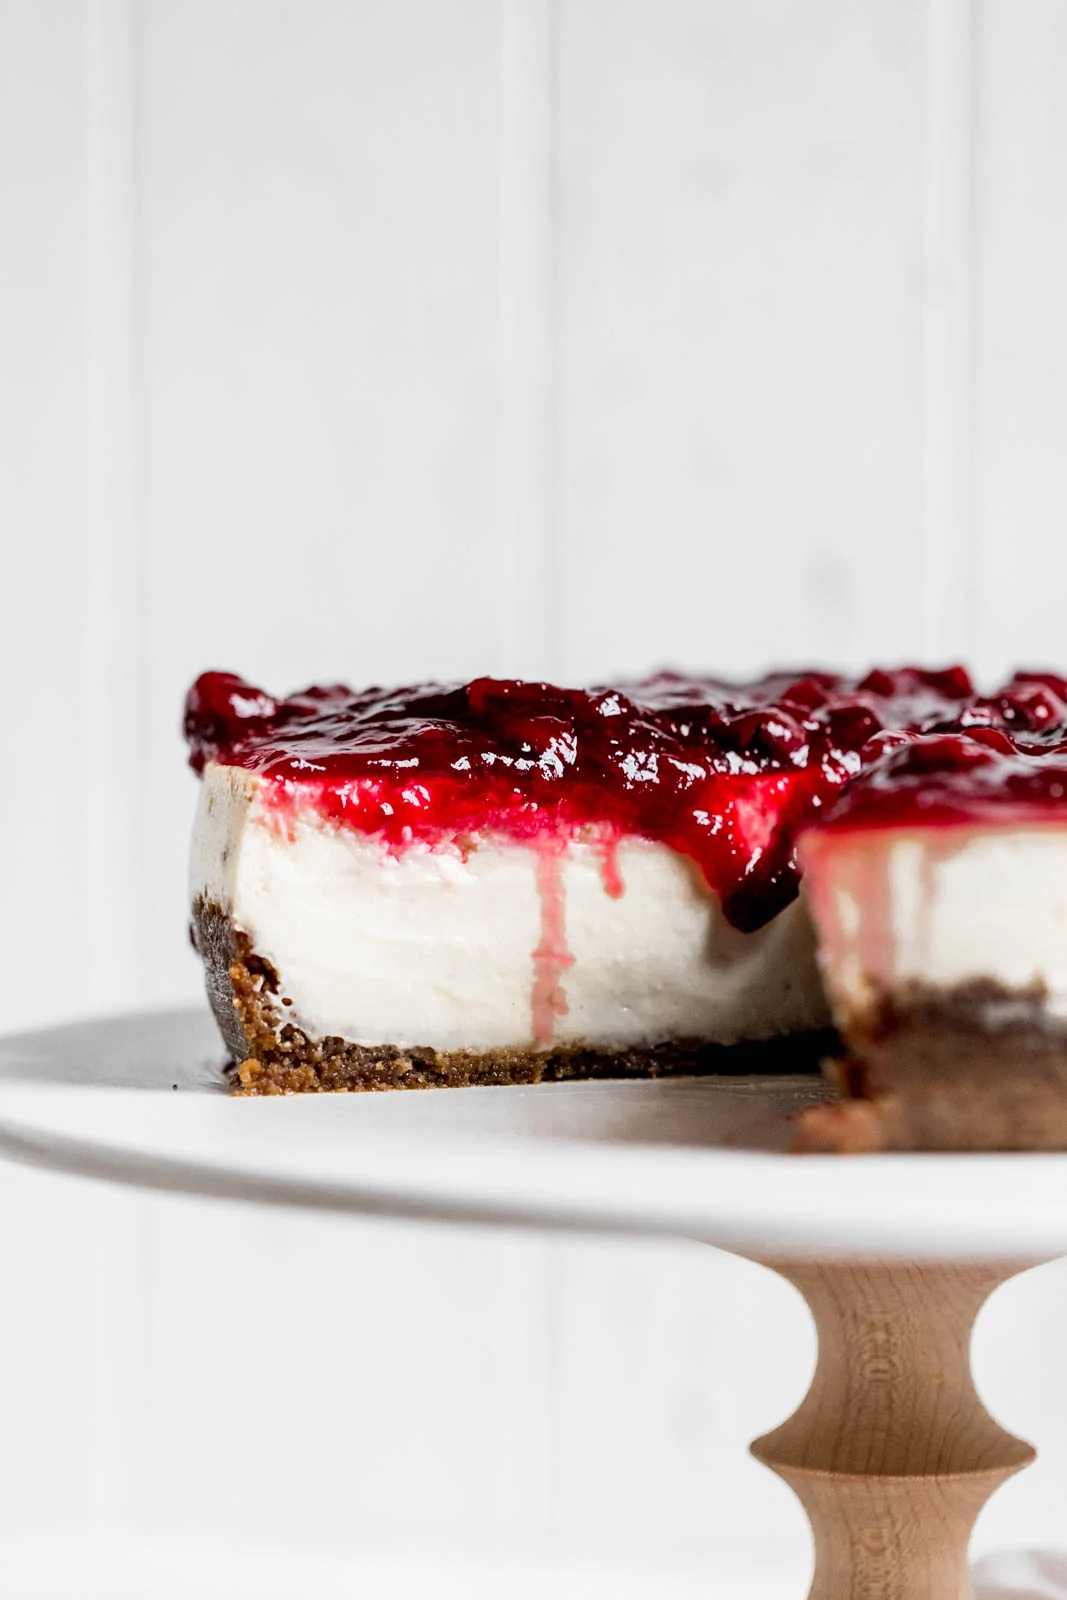 How to make the perfect cheesecake: to get that luxuriously smooth cheesecake baked to perfection, you've got to follow these tried and tested steps. 